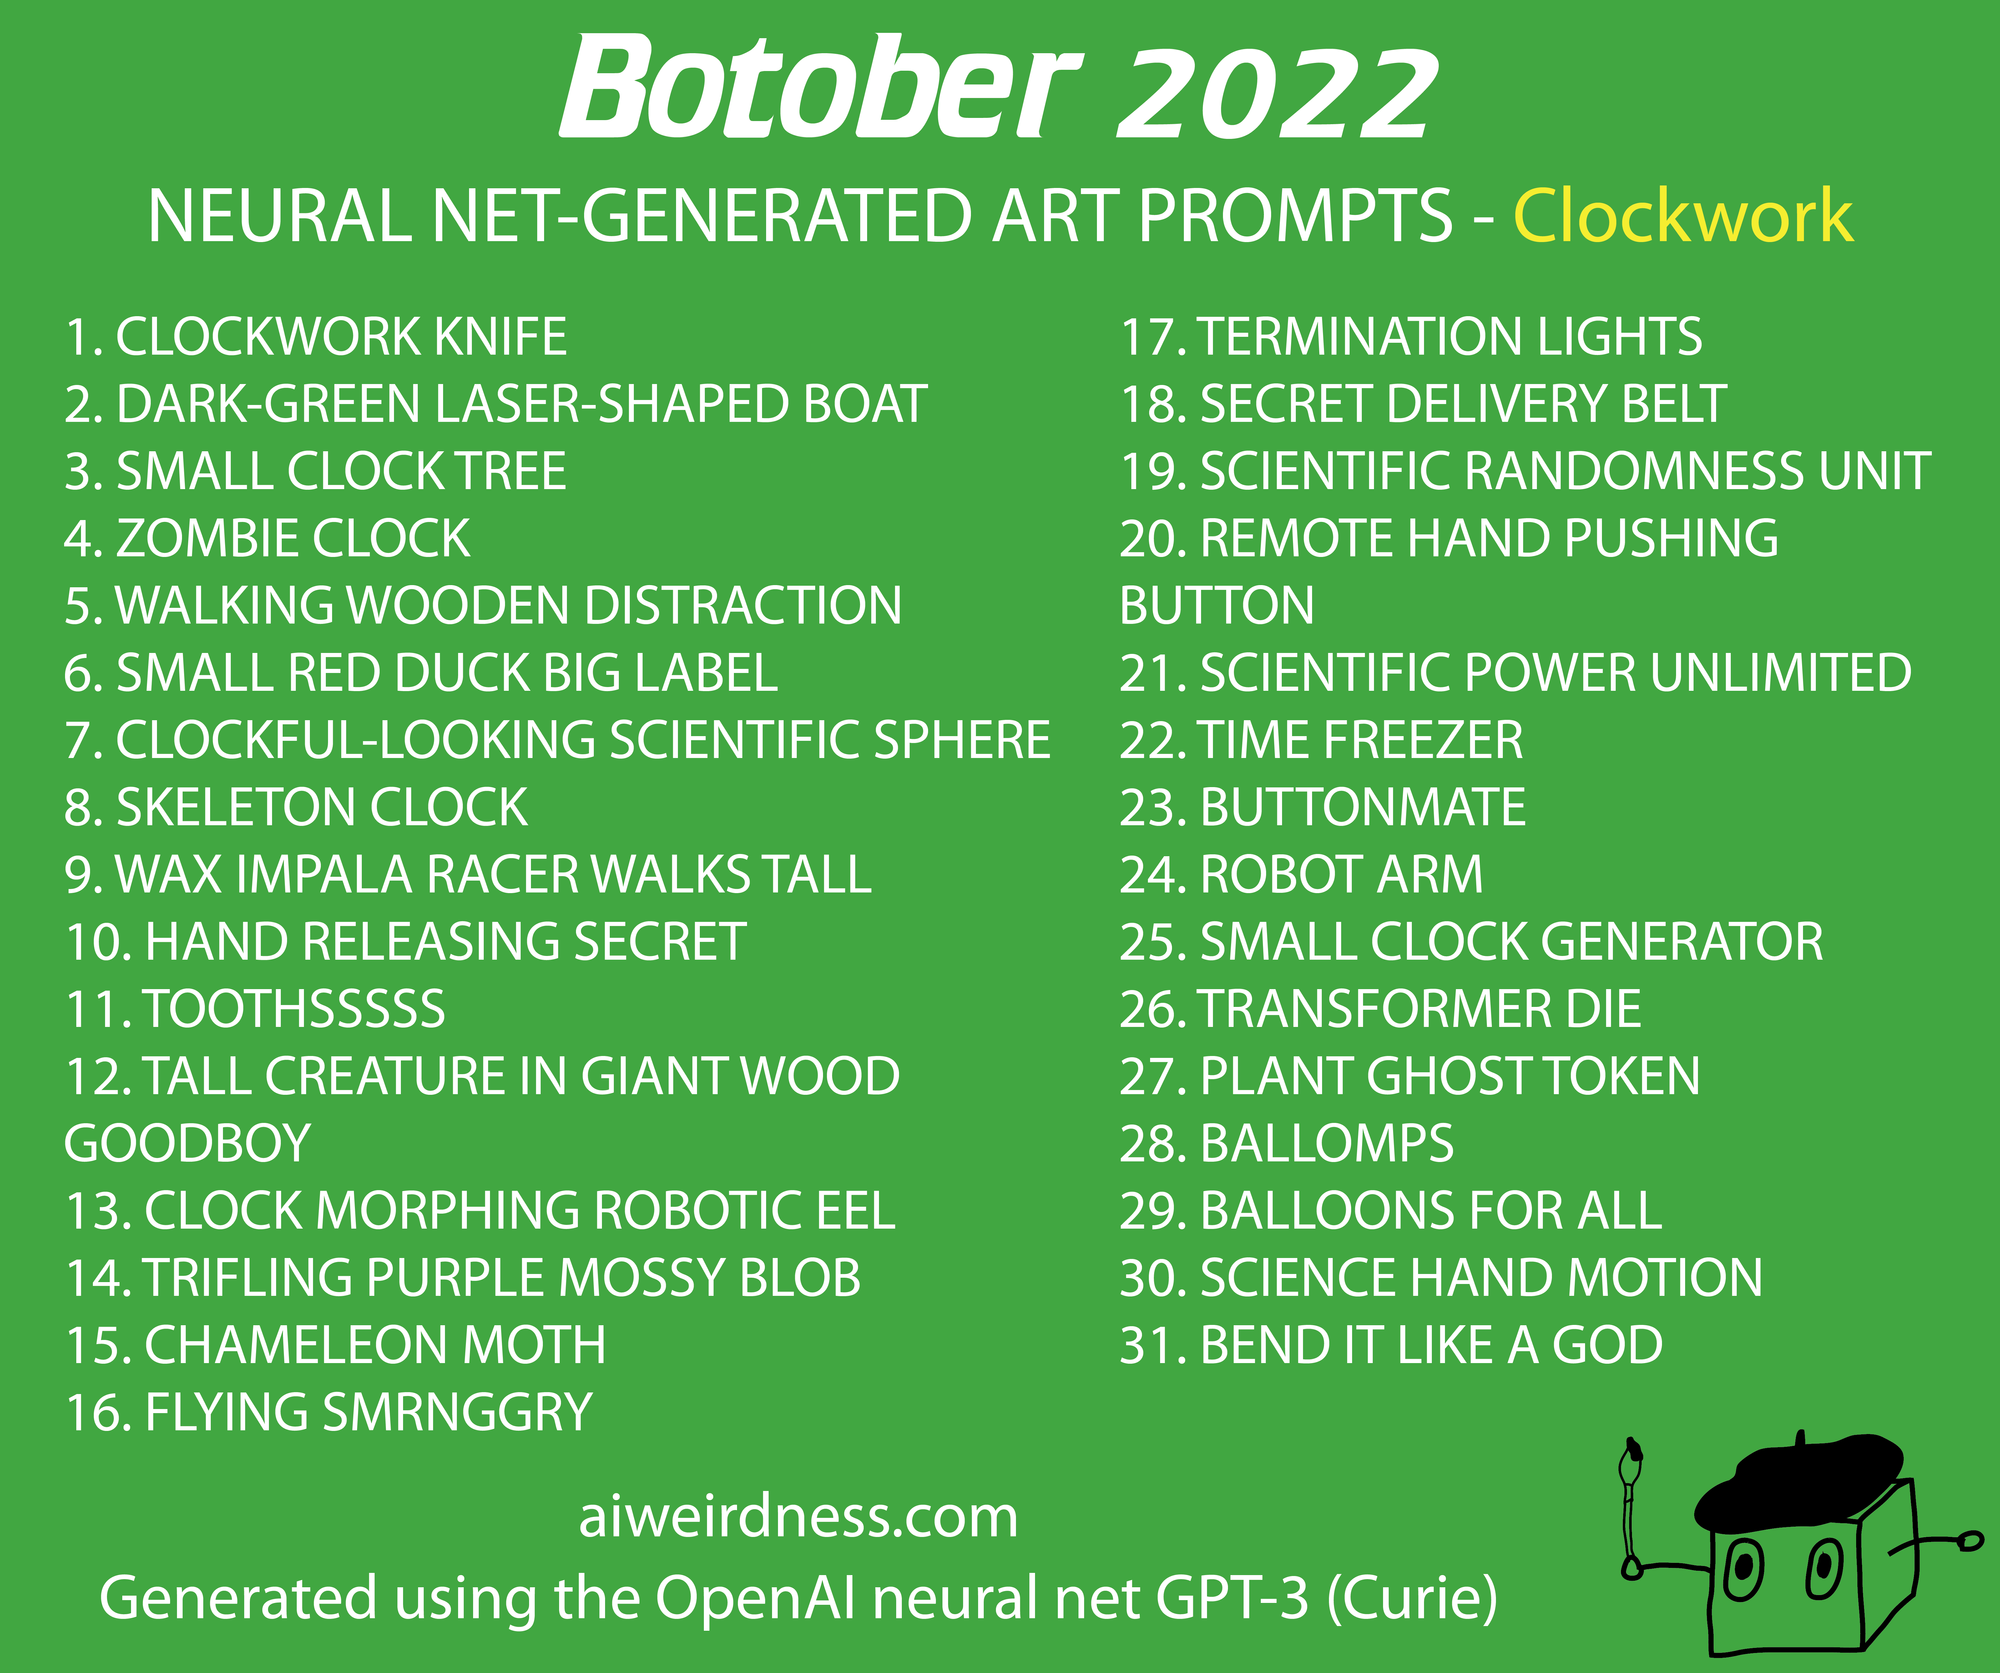 1.. CLOCKWORK KNIFE 2. DARK-GREEN LASER-SHAPED BOAT 3. SMALL CLOCK TREE 4. ZOMBIE CLOCK 5. WALKING WOODEN DISTRACTION 6. SMALL RED DUCK BIG LABEL 7. CLOCKFUL-LOOKING SCIENTIFIC SPHERE 8. SKELETON CLOCK 9. WAX IMPALA RACER WALKS TALL 10. HAND RELEASING SECRET 11. TOOTHSSSSS 12. TALL CREATURE IN GIANT WOOD GOODBOY 13. CLOCK MORPHING ROBOTIC EEL 14. TRIFLING PURPLE MOSSY BLOB 15. CHAMELEON MOTH 16. FLYING SMRNGGRY 17. TERMINATION LIGHTS 18. SECRET DELIVERY BELT 19. SCIENTIFIC RANDOMNESS UNIT 20. REMOTE HAND PUSHING BUTTON 21. SCIENTIFIC POWER UNLIMITED 22. TIME FREEZER 23. BUTTONMATE 24. ROBOT ARM 25. SMALL CLOCK GENERATOR 26. TRANSFORMER DIE 27. PLANT GHOST TOKEN 28. BALLOMPS 29. BALLOONS FOR ALL 30. SCIENCE HAND MOTION 31. BEND IT LIKE A GOD